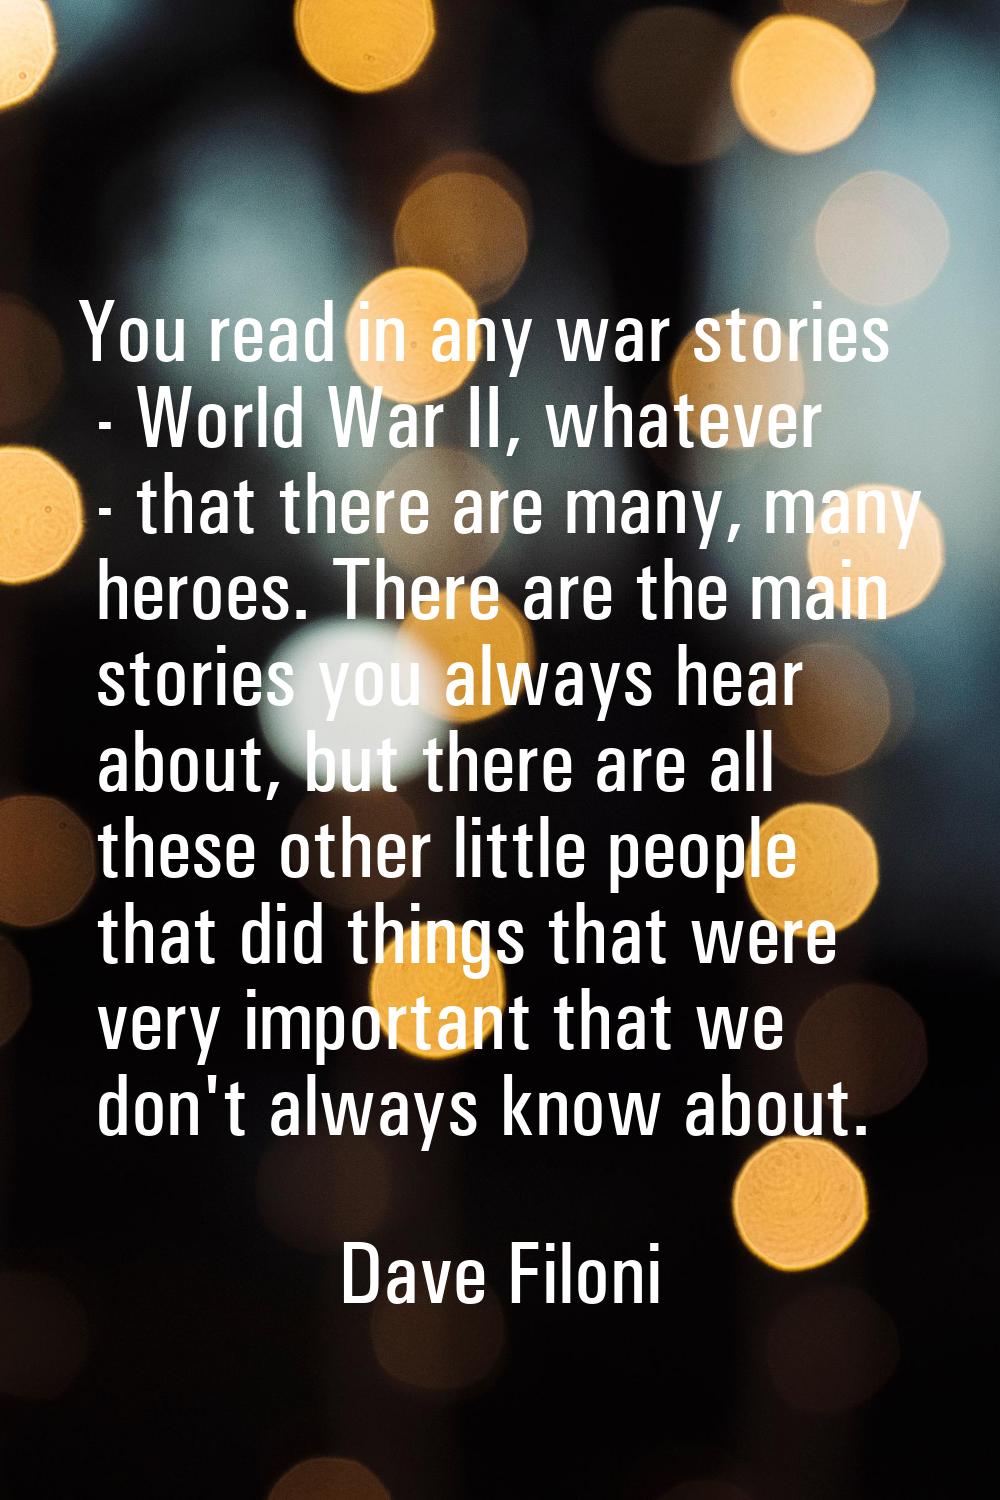 You read in any war stories - World War II, whatever - that there are many, many heroes. There are 